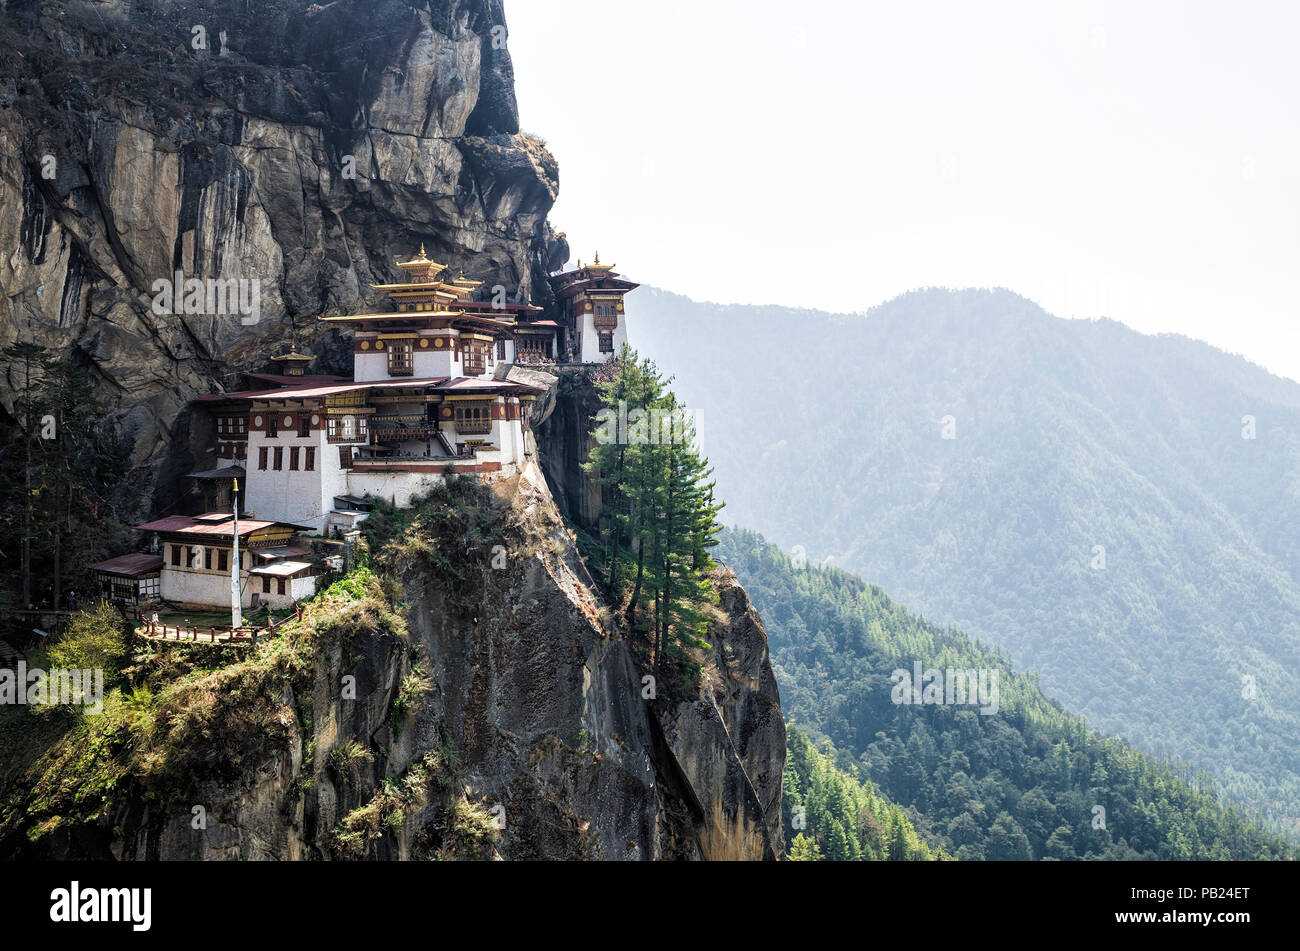 Taktshang monastery, Bhutan - Tigers Nest Monastery also know as Taktsang Palphug Monastery. Located in the cliffside of the upper Paro valley, in Bhu Stock Photo